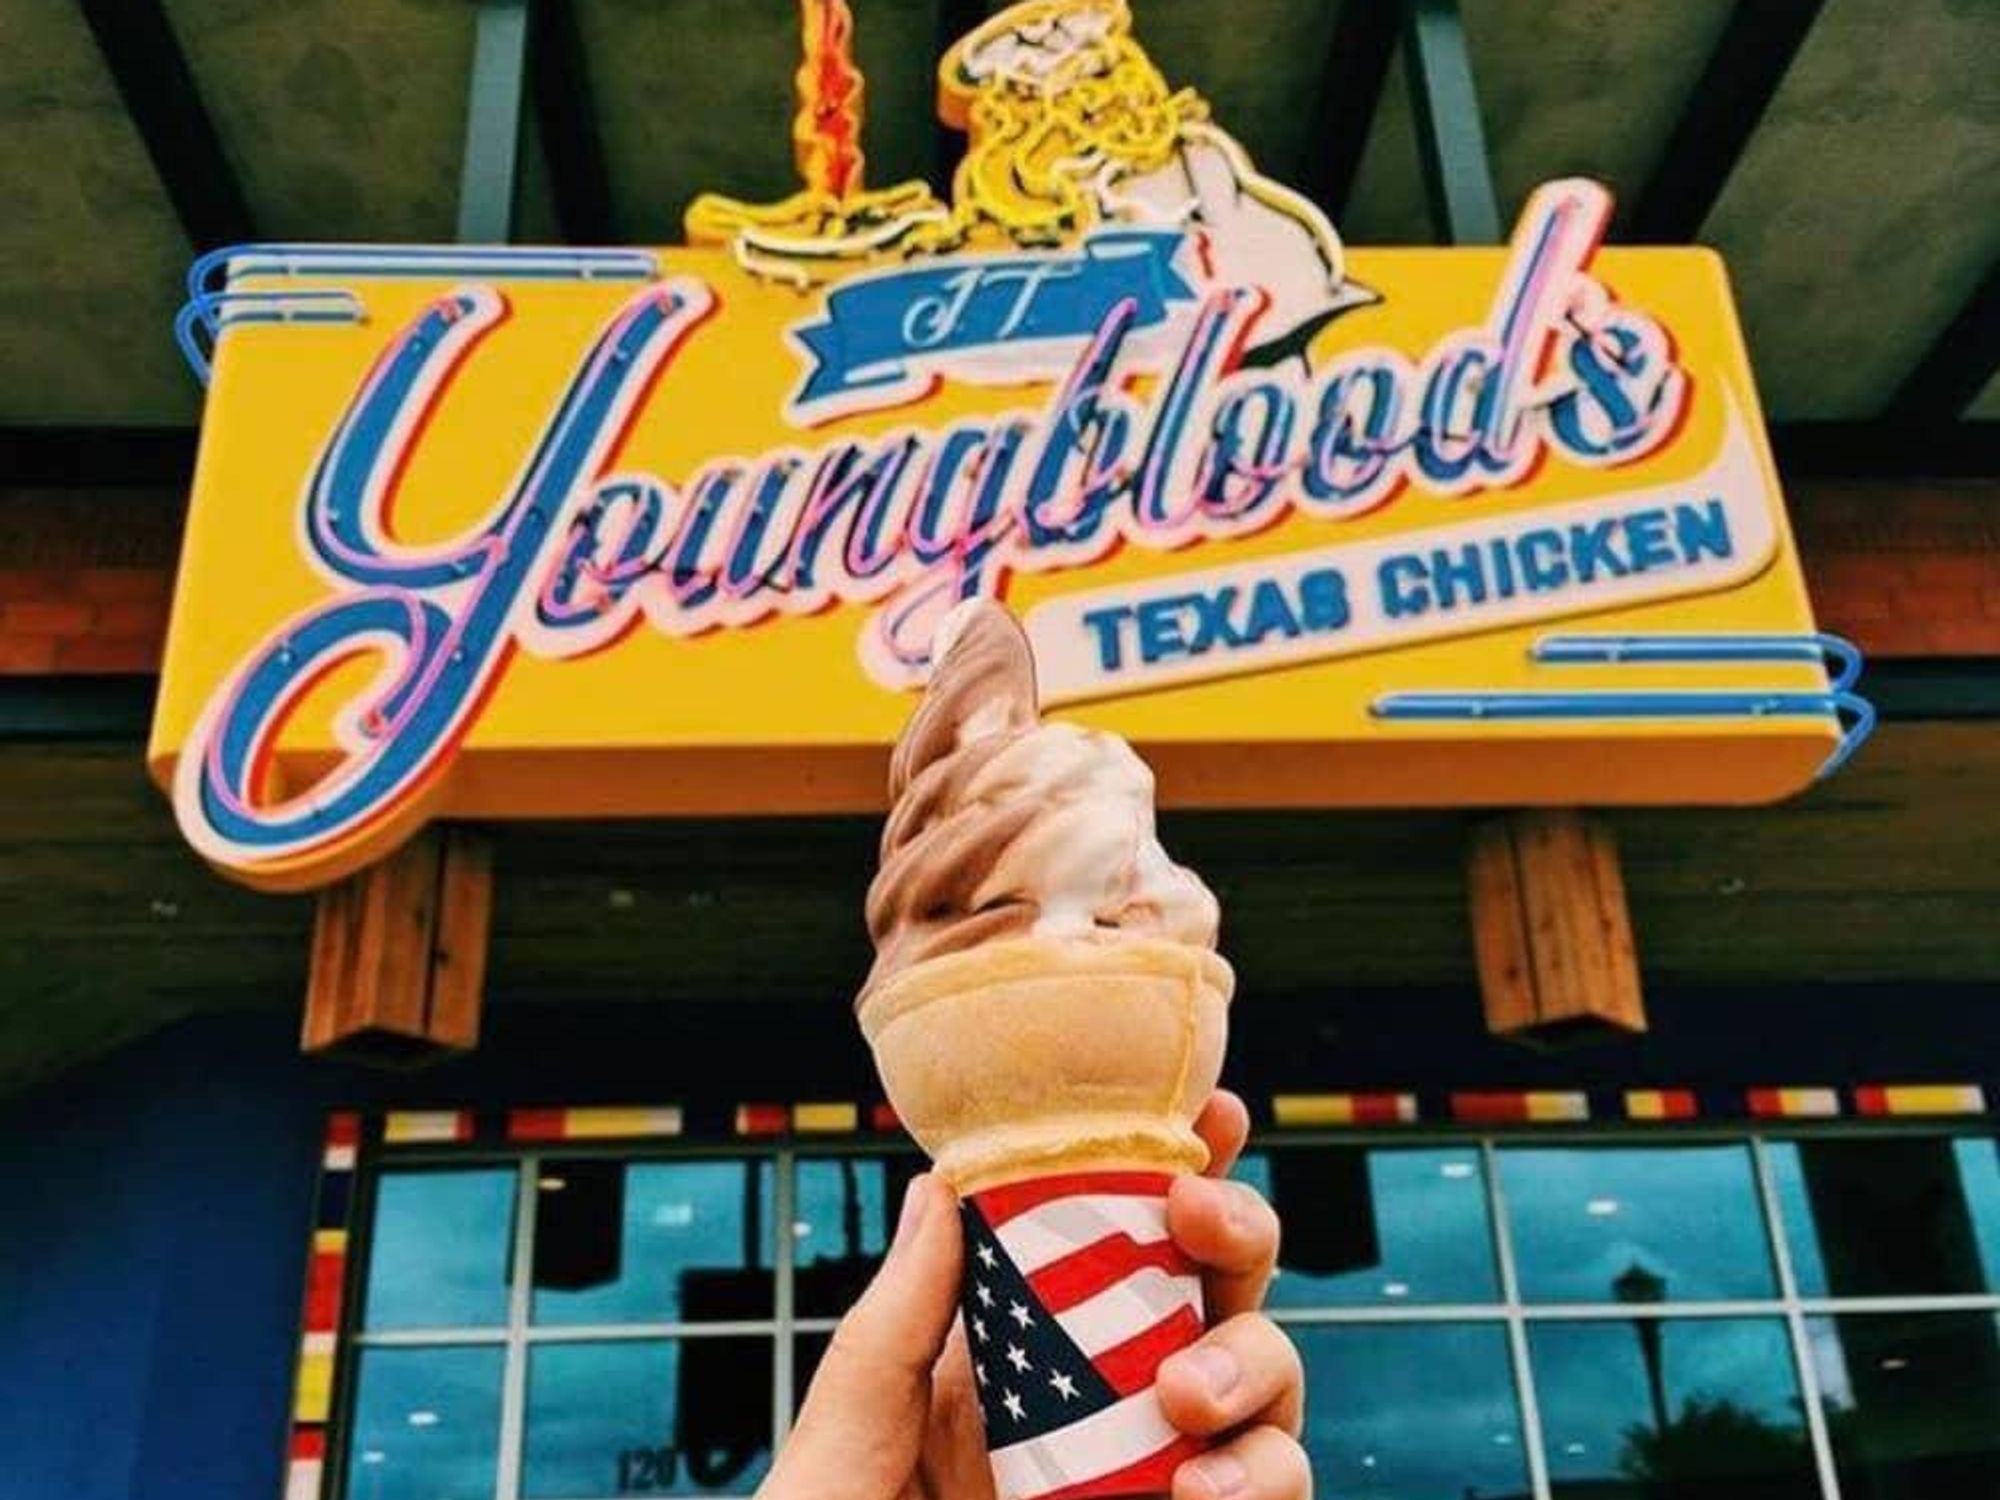 J.T. Youngblood's